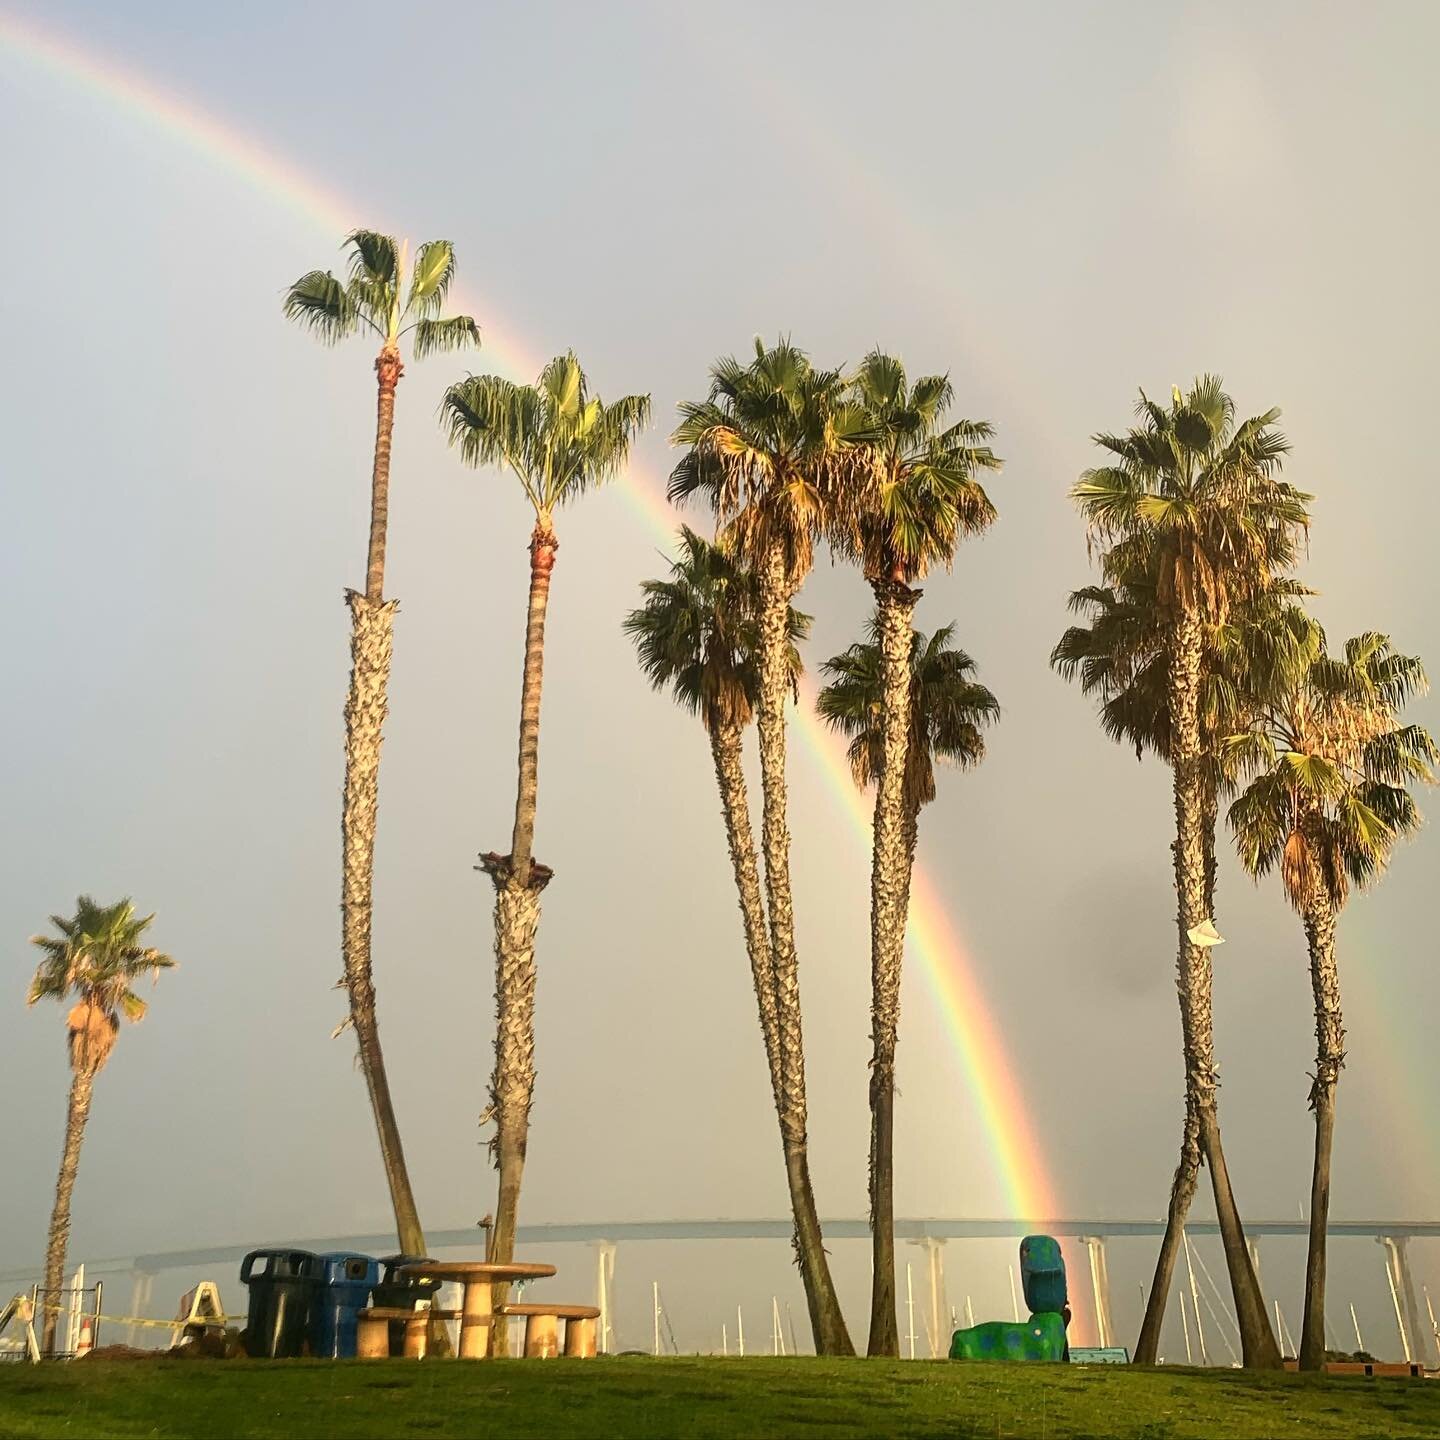 Got caught in the rain today, but it was worth it. 🌧 🌈 🌴